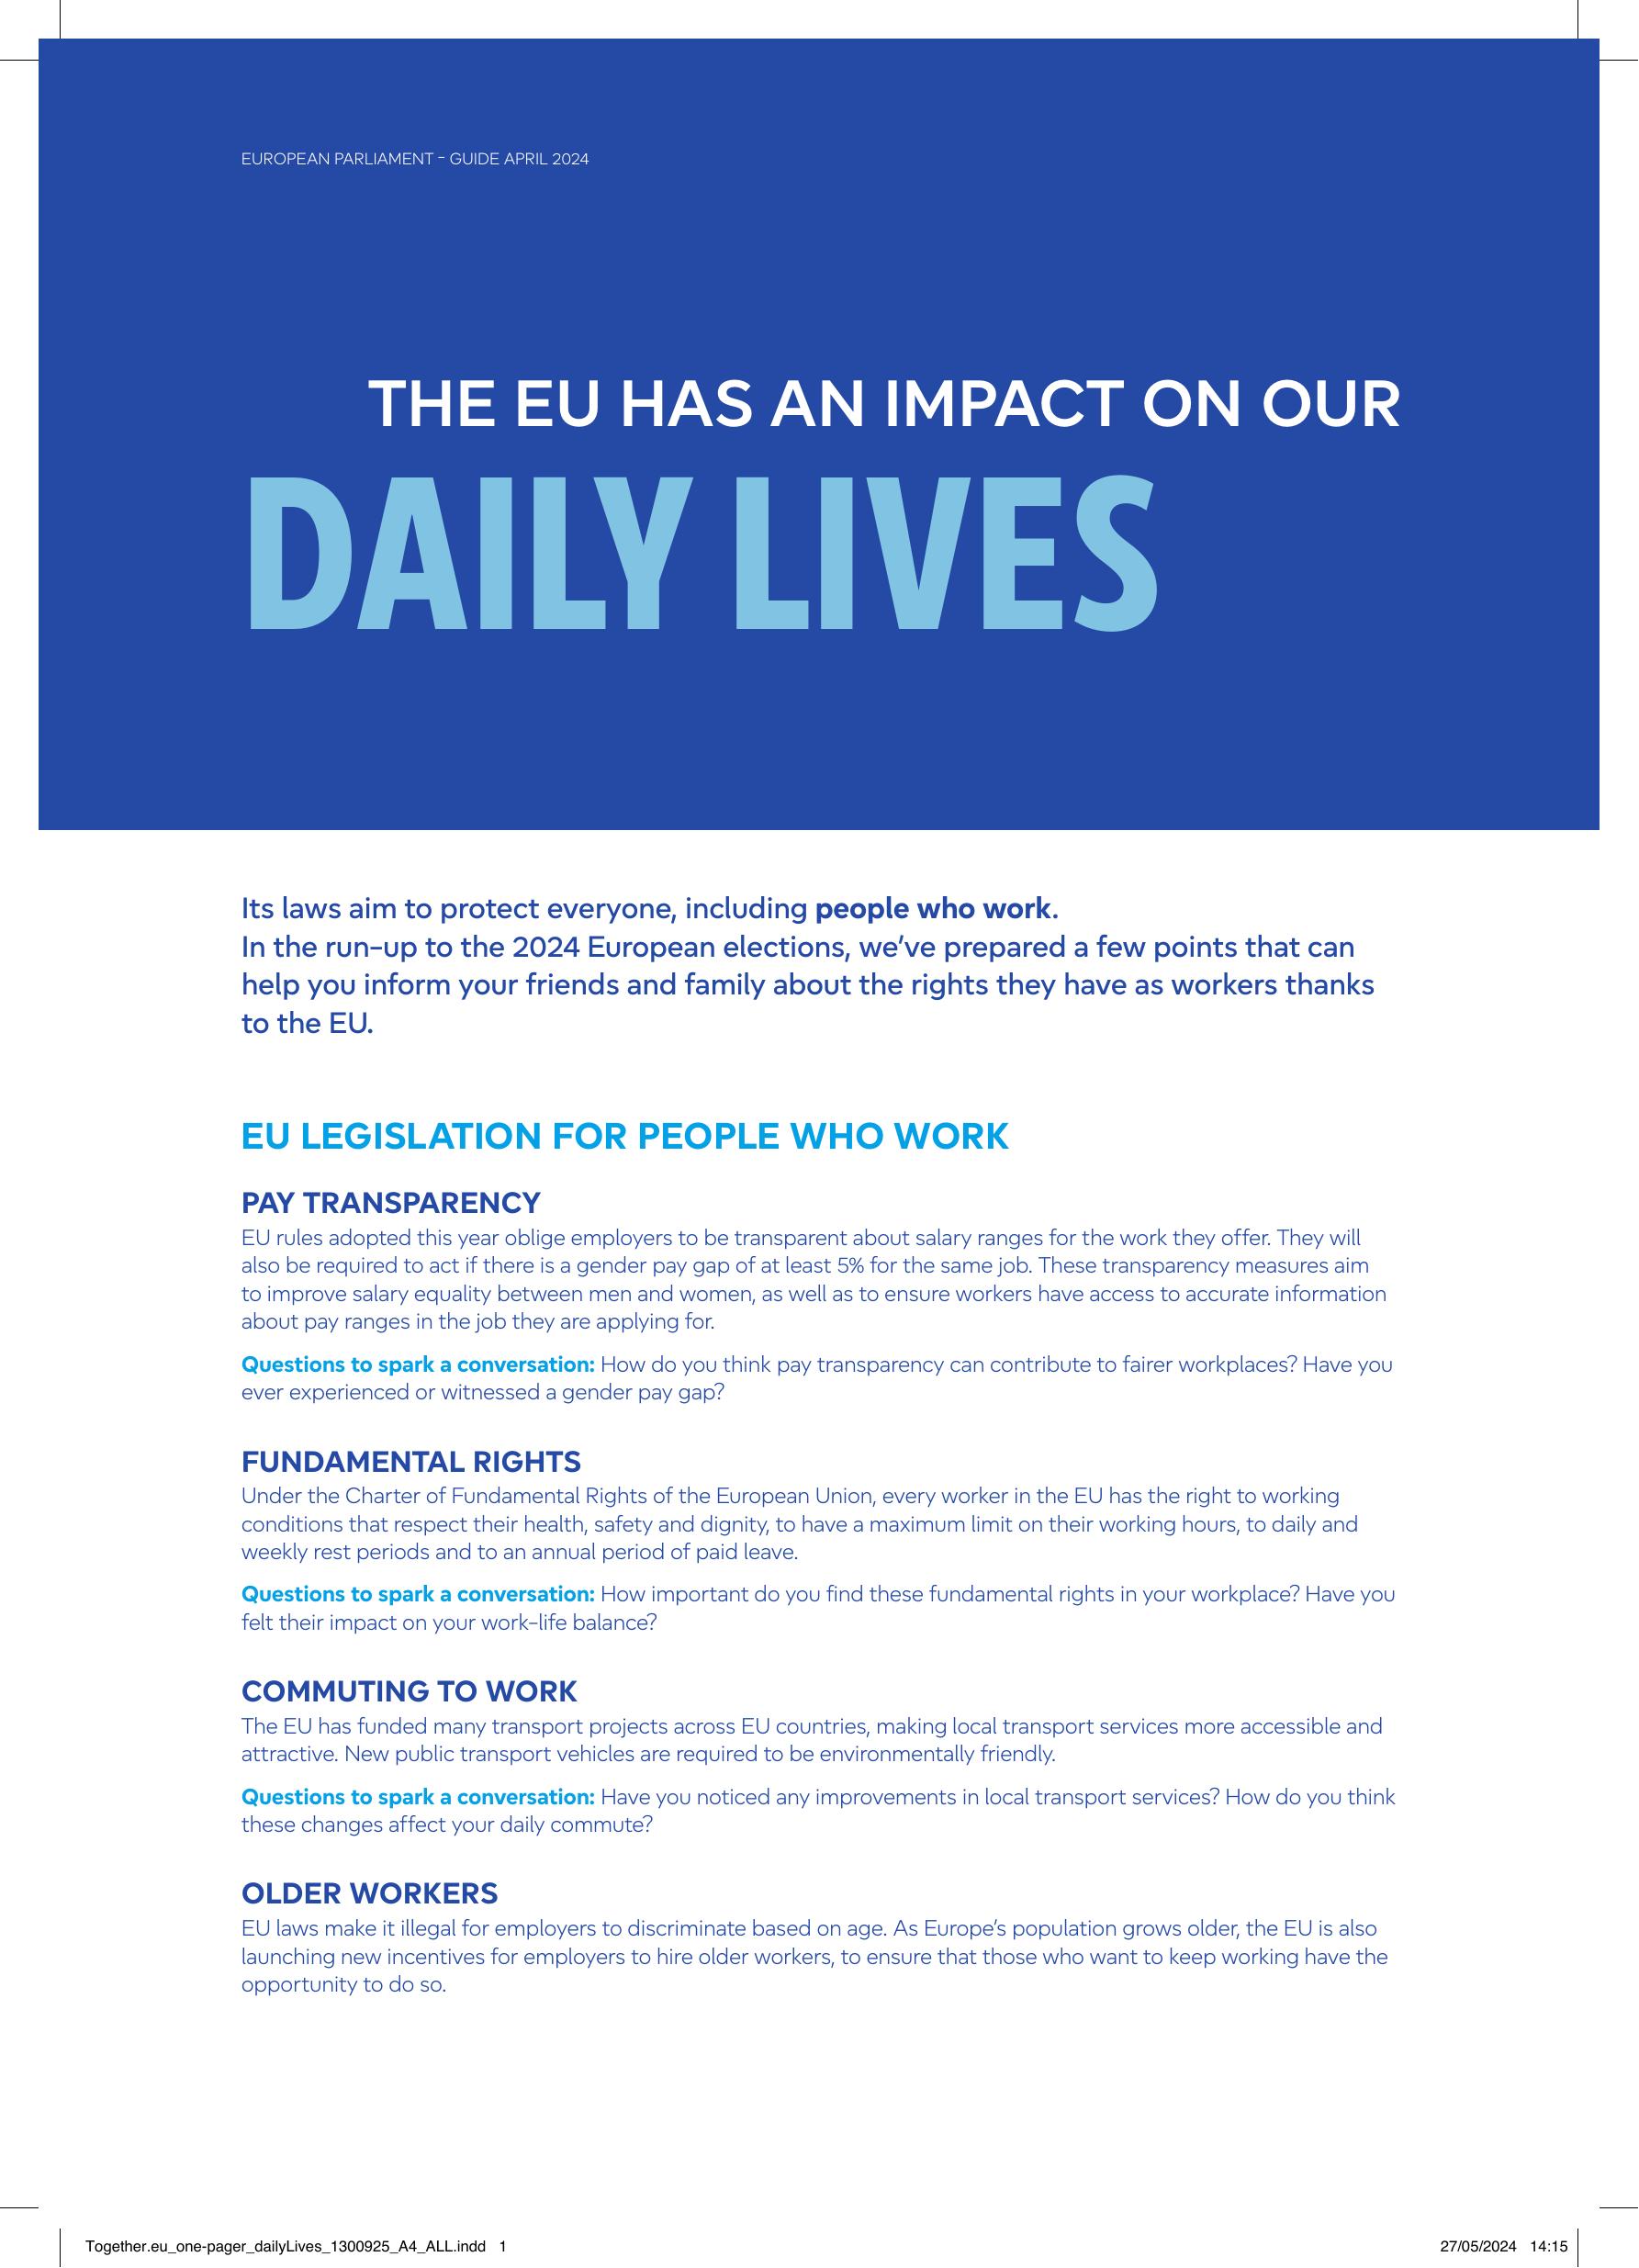 Together.eu_one-pager_dailyLives_2_print.pdf